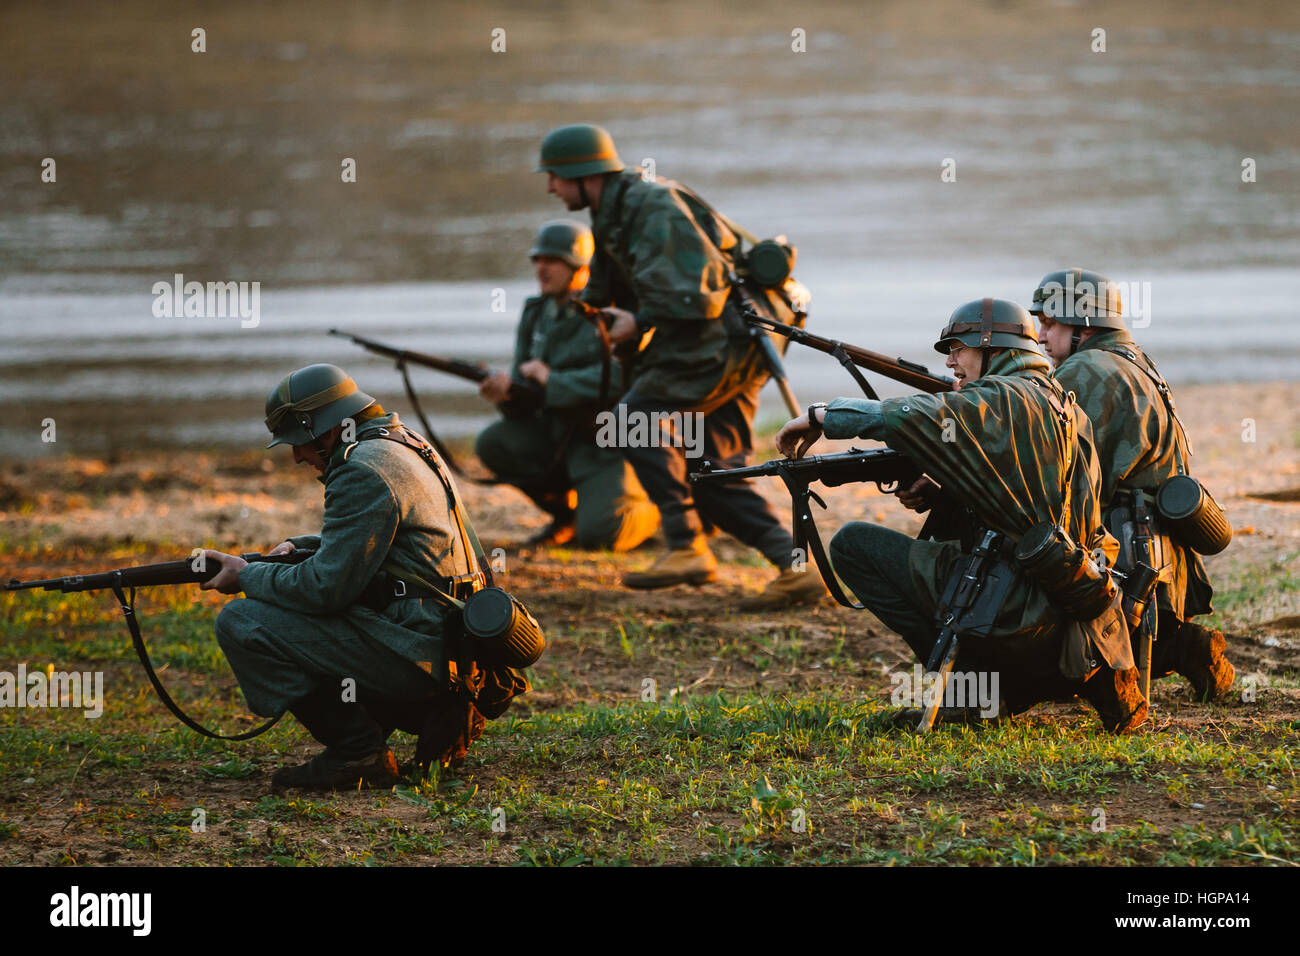 MOGILEV, BELARUS - MAY, 08, 2015: Reconstruction of Battle during events dedicated to 70th anniversary of the Victory of the Soviet people in the Grea Stock Photo